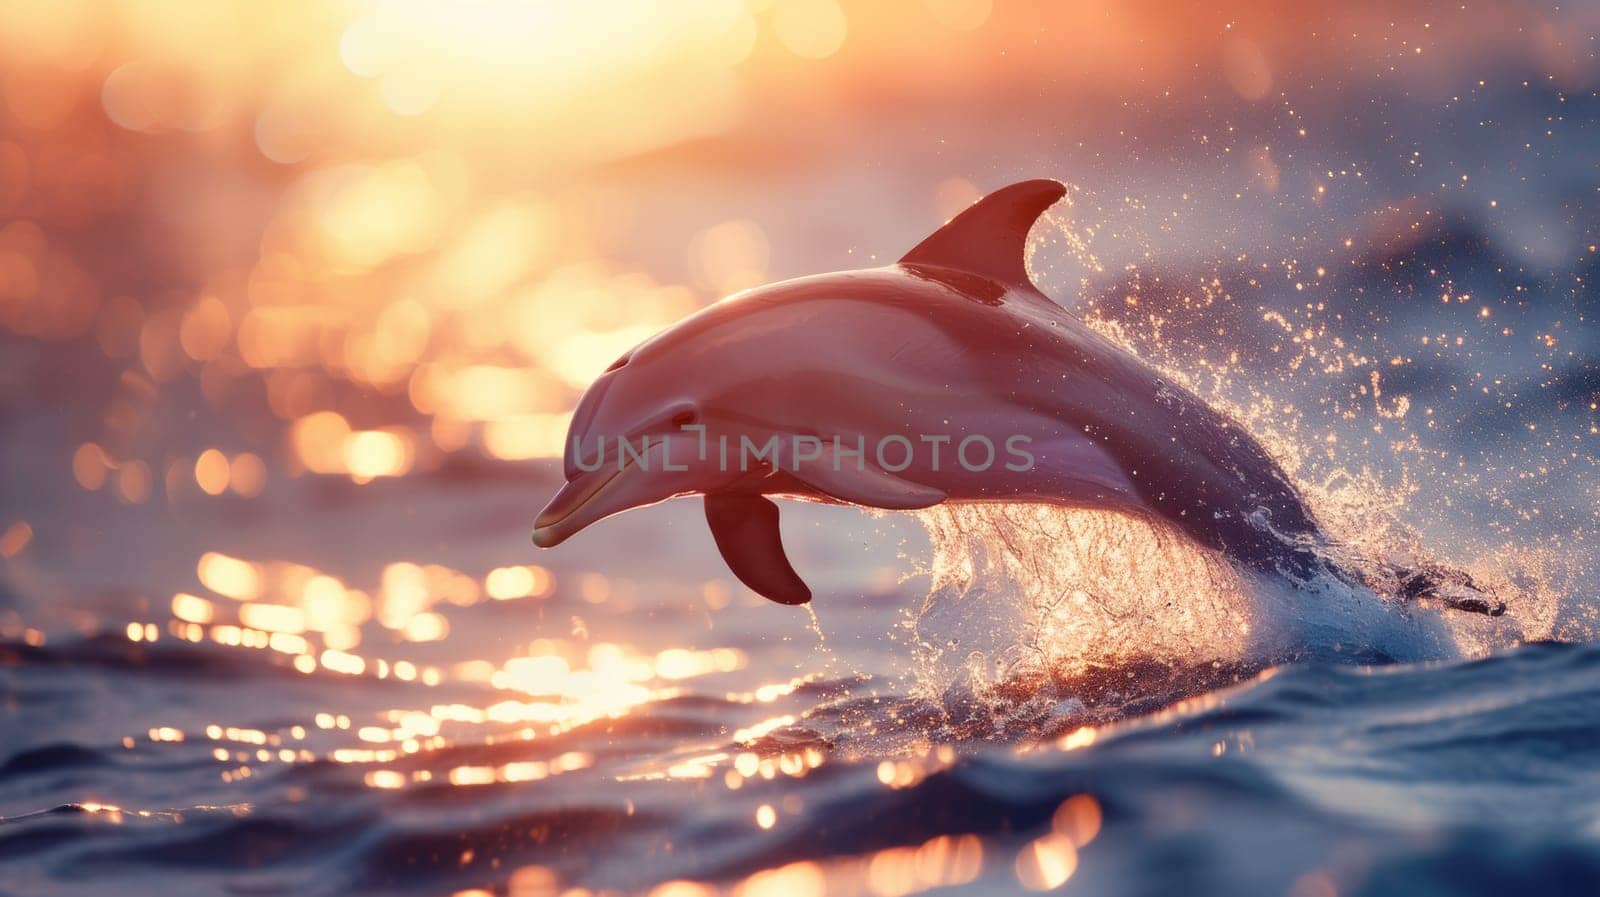 A dolphin jumping out of the water in a sunset